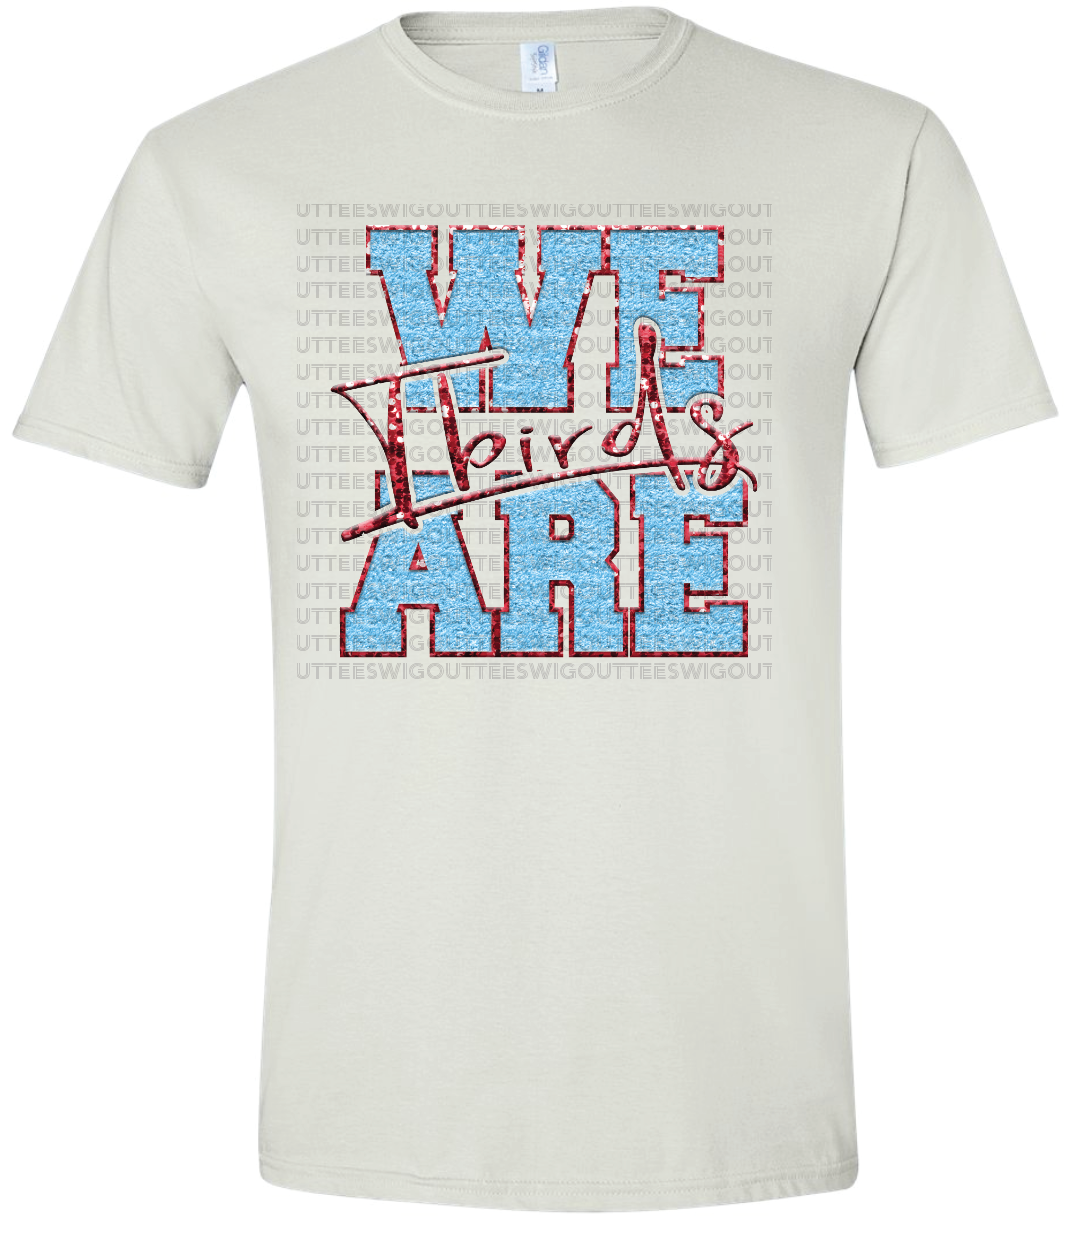 We Are Tbirds *FAUX* Chenille & Glitter Gildan Softstyle T-Shirt